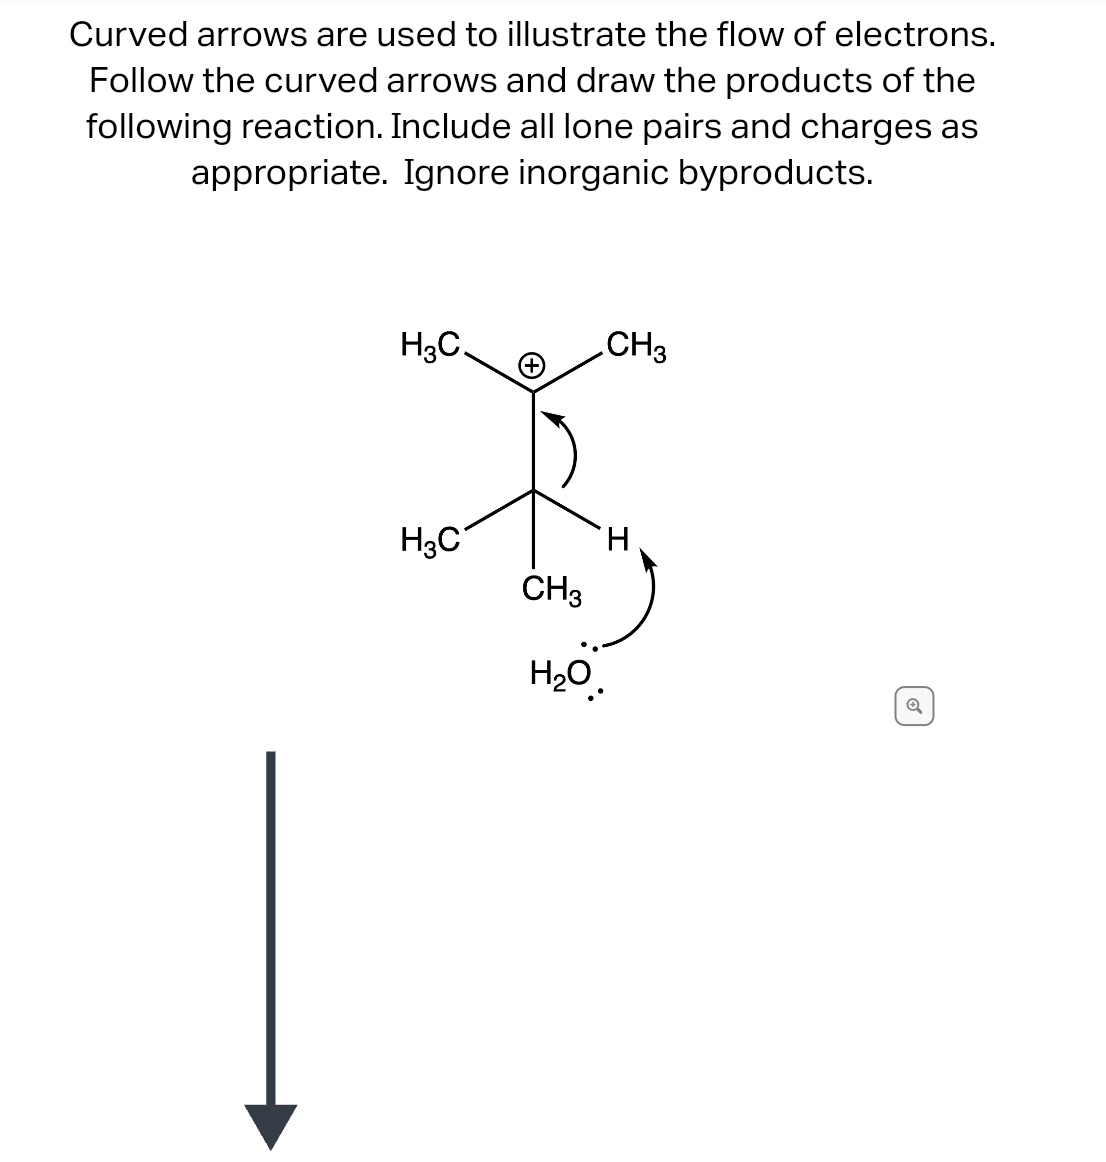 Curved arrows are used to illustrate the flow of electrons.
Follow the curved arrows and draw the products of the
following reaction. Include all lone pairs and charges as
appropriate. Ignore inorganic byproducts.
H₂C.
H₂C
CH3
CH3
H
H₂O.
Q